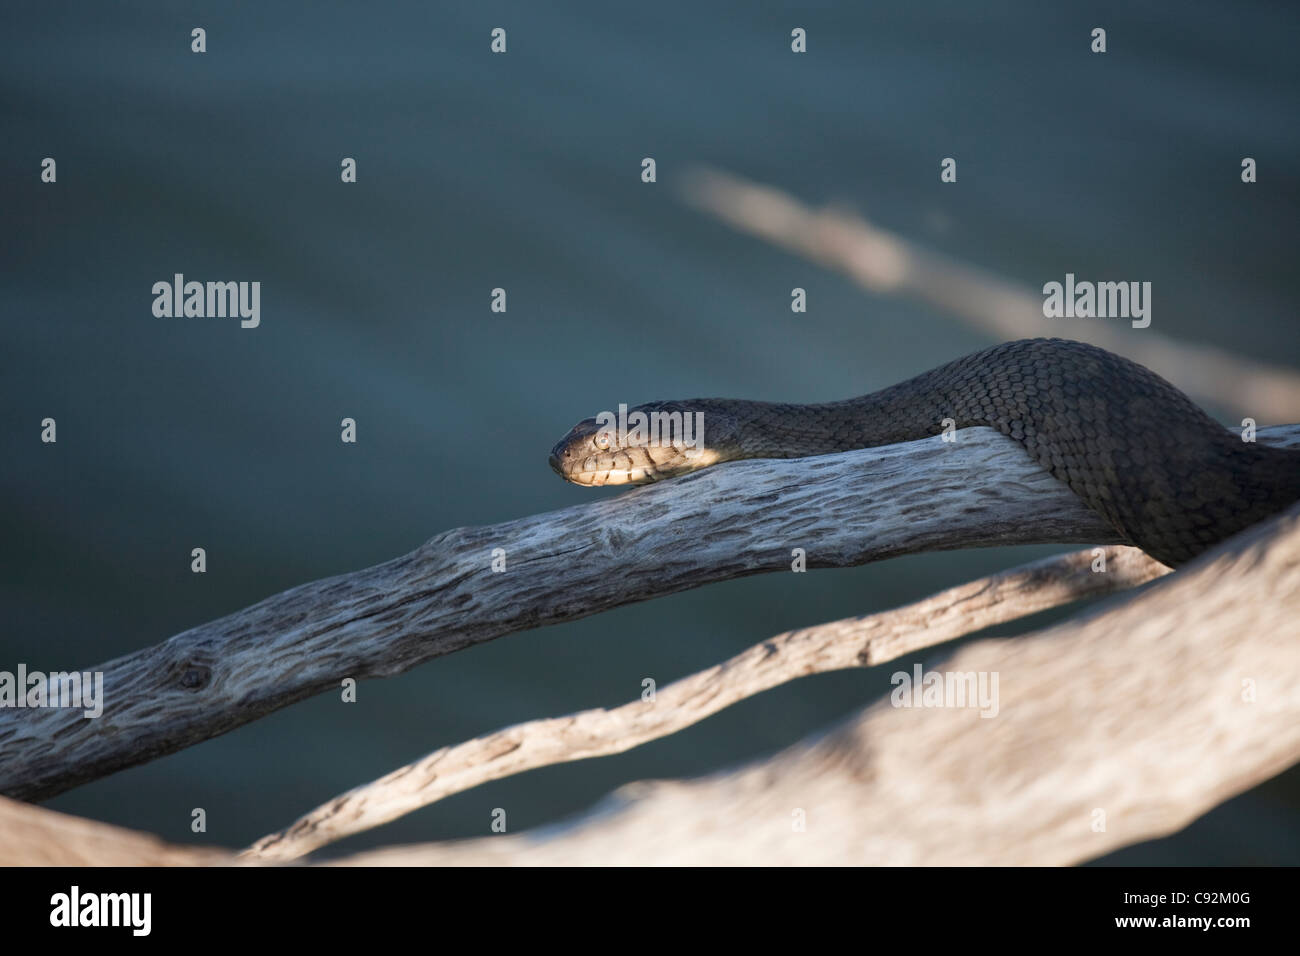 Venomous snake commonly known as a water moccasin (Agkistrodon piscivorus) suns itself on a branch in Falcon Lake in South Texas Stock Photo